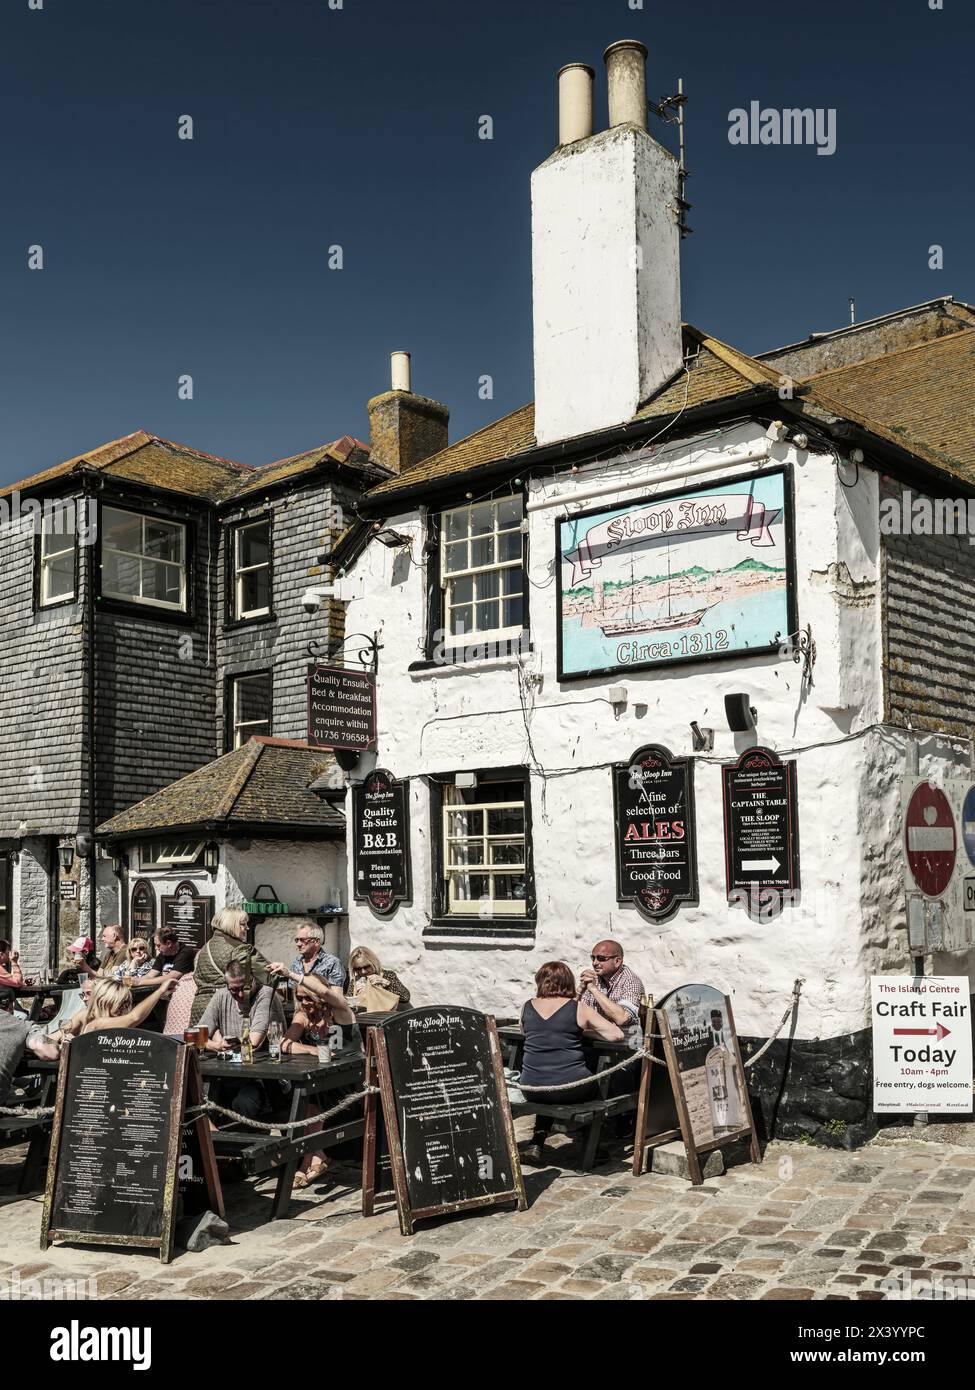 The Sloop Inn is one of the oldest inns in Cornwall, dating back to 1312, with the current 17th century building standing on the quay at St Ives overl Stock Photo